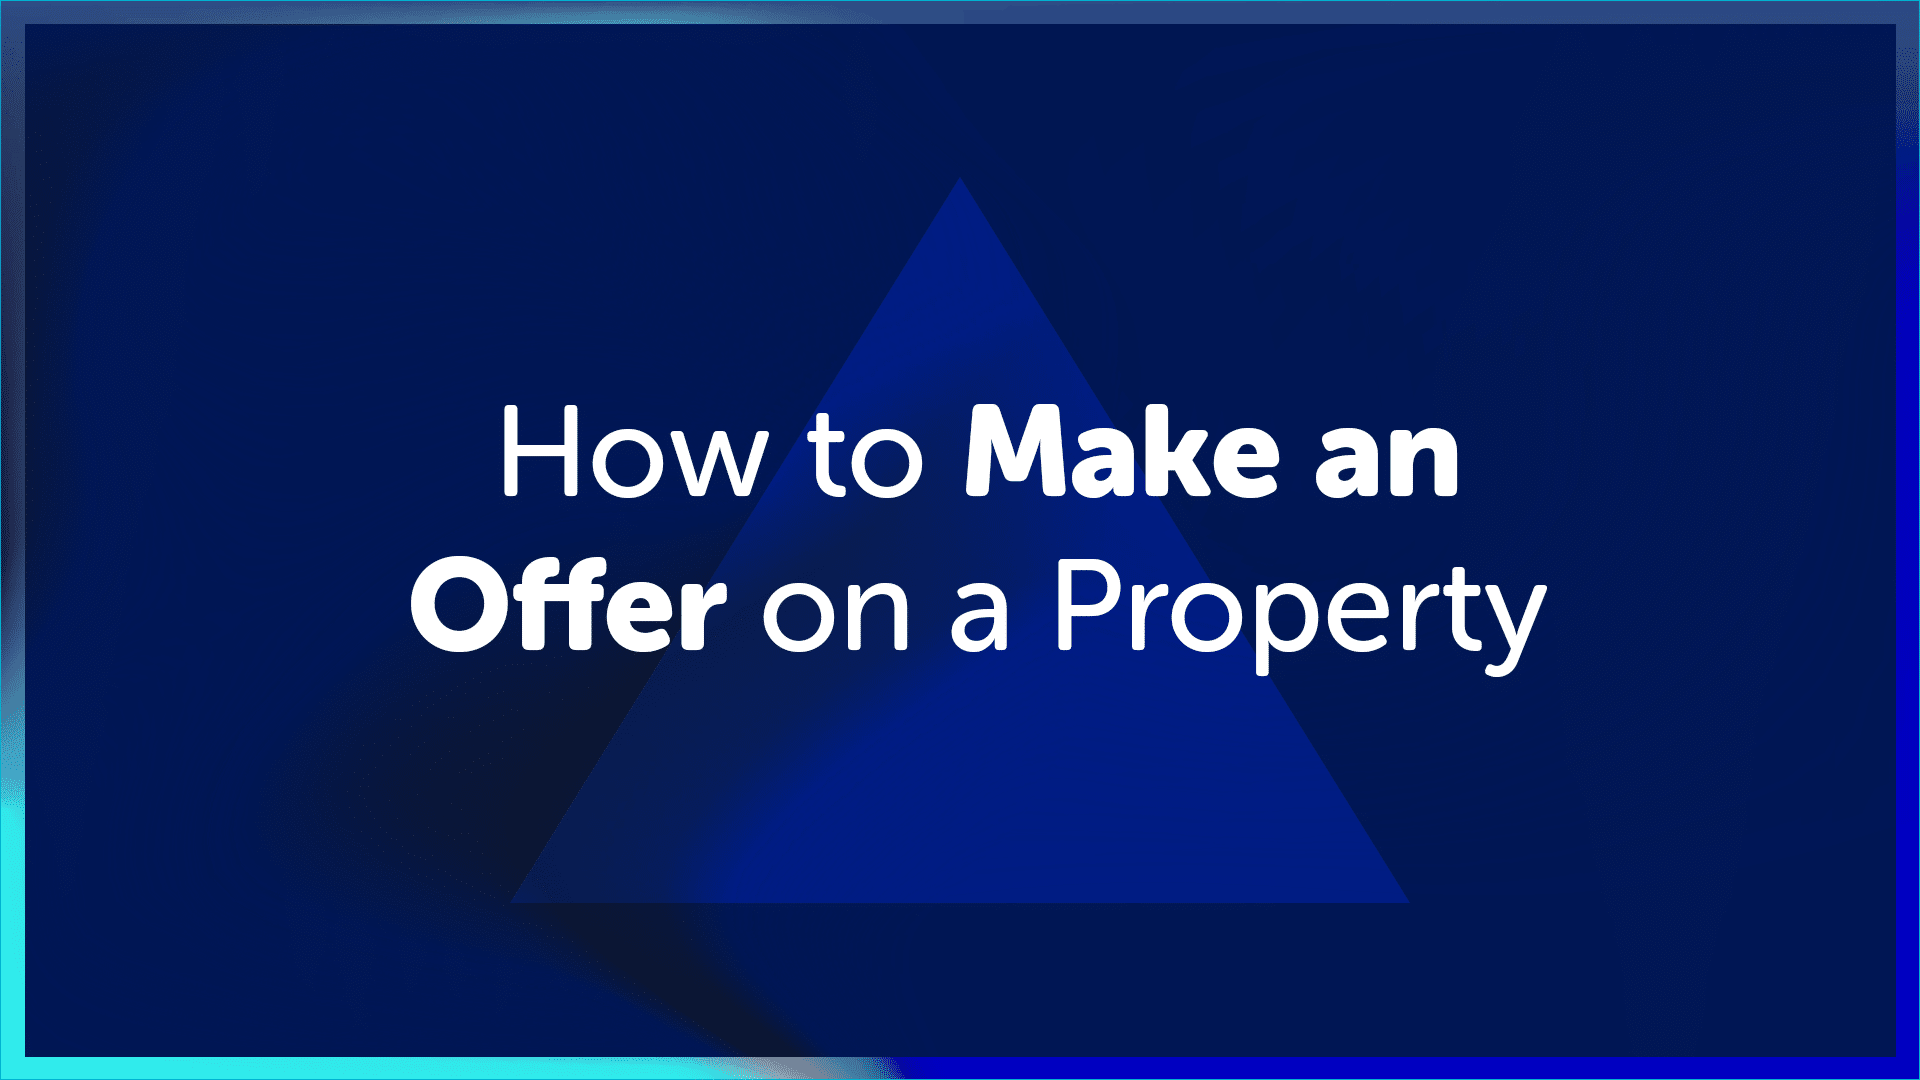 How to Make an Offer on a Property in Leeds